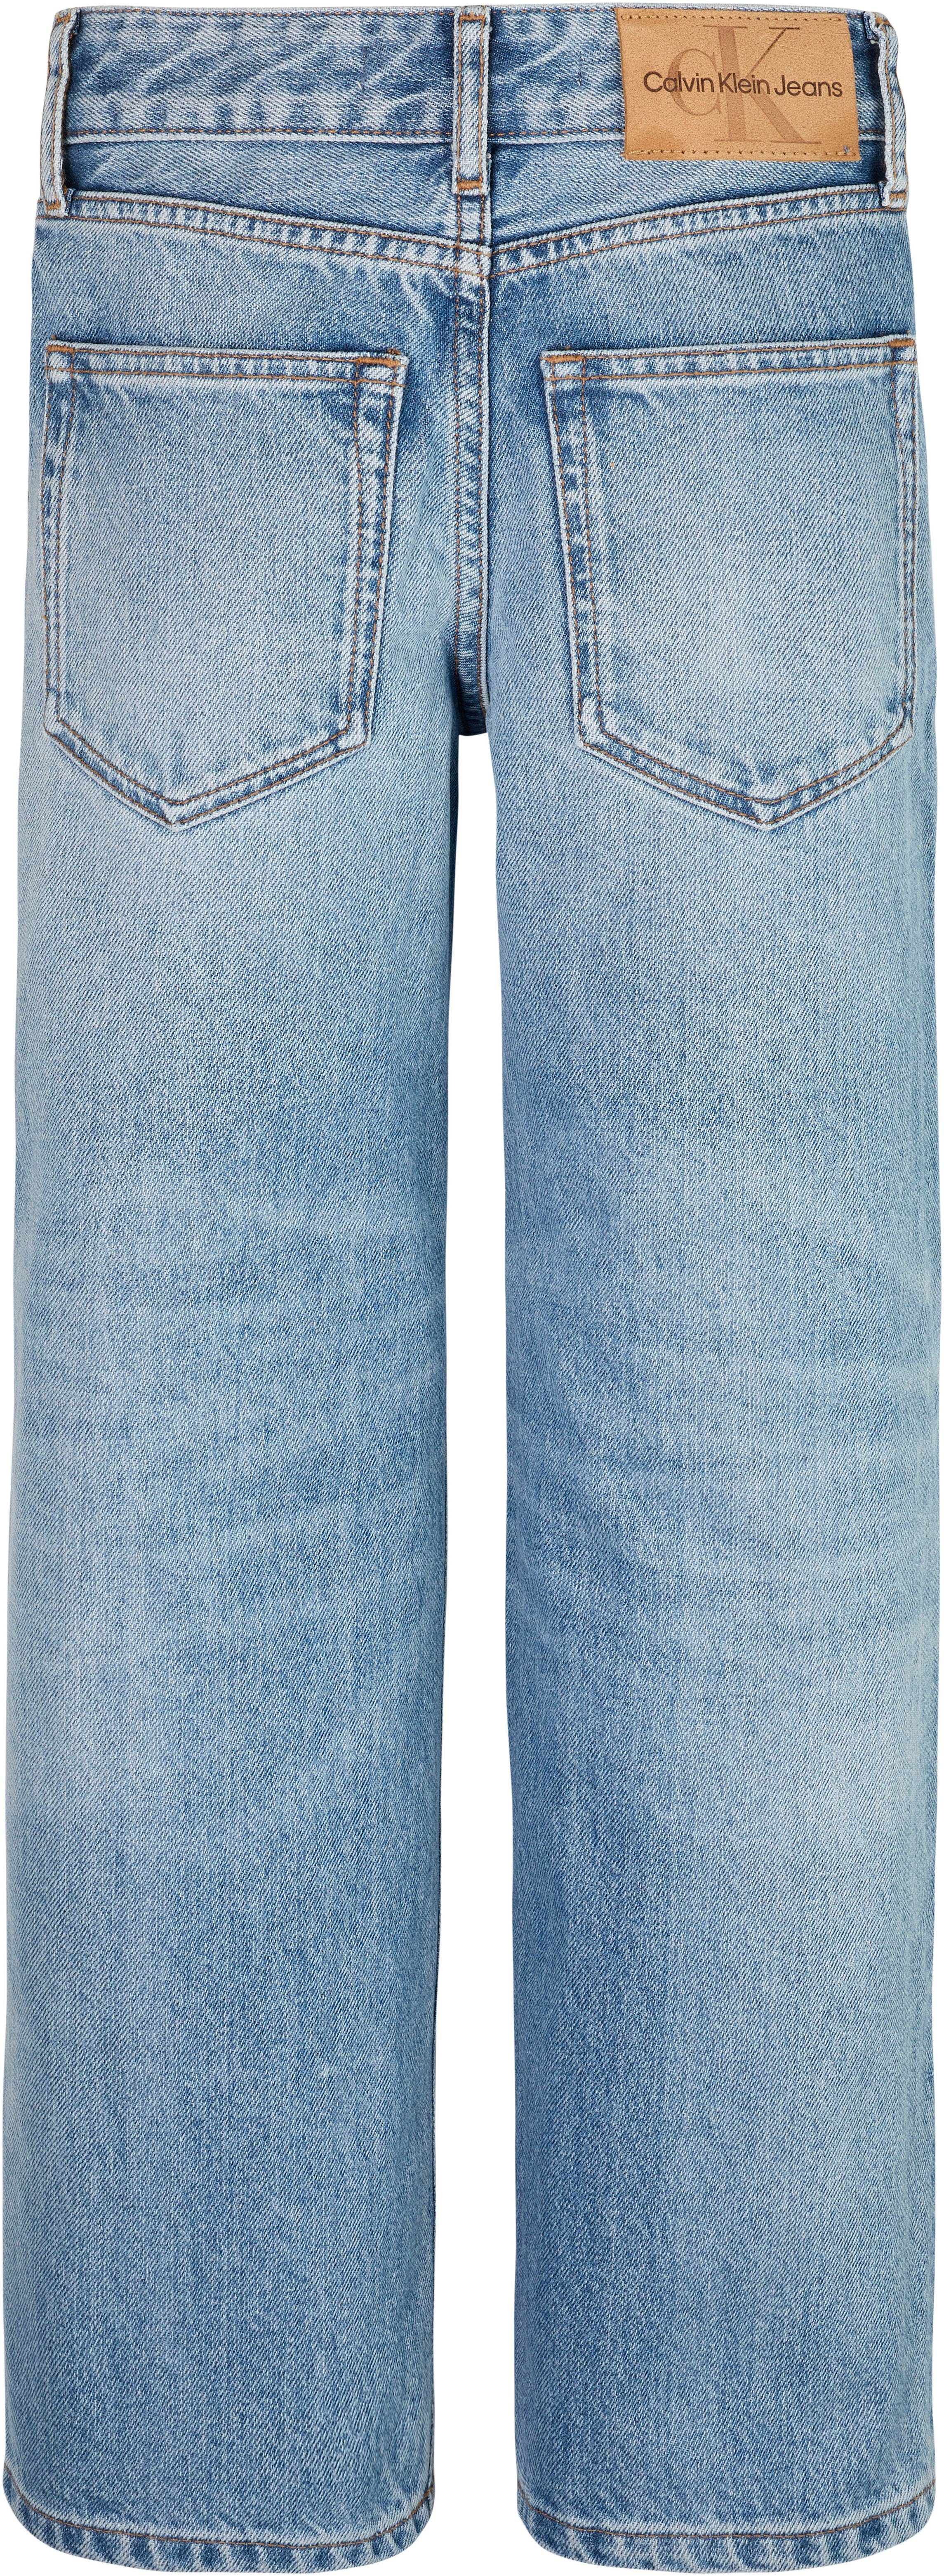 Calvin Klein Jeans AUTH. RELAXED BLUE SKATER Stretch-Jeans LIGHT